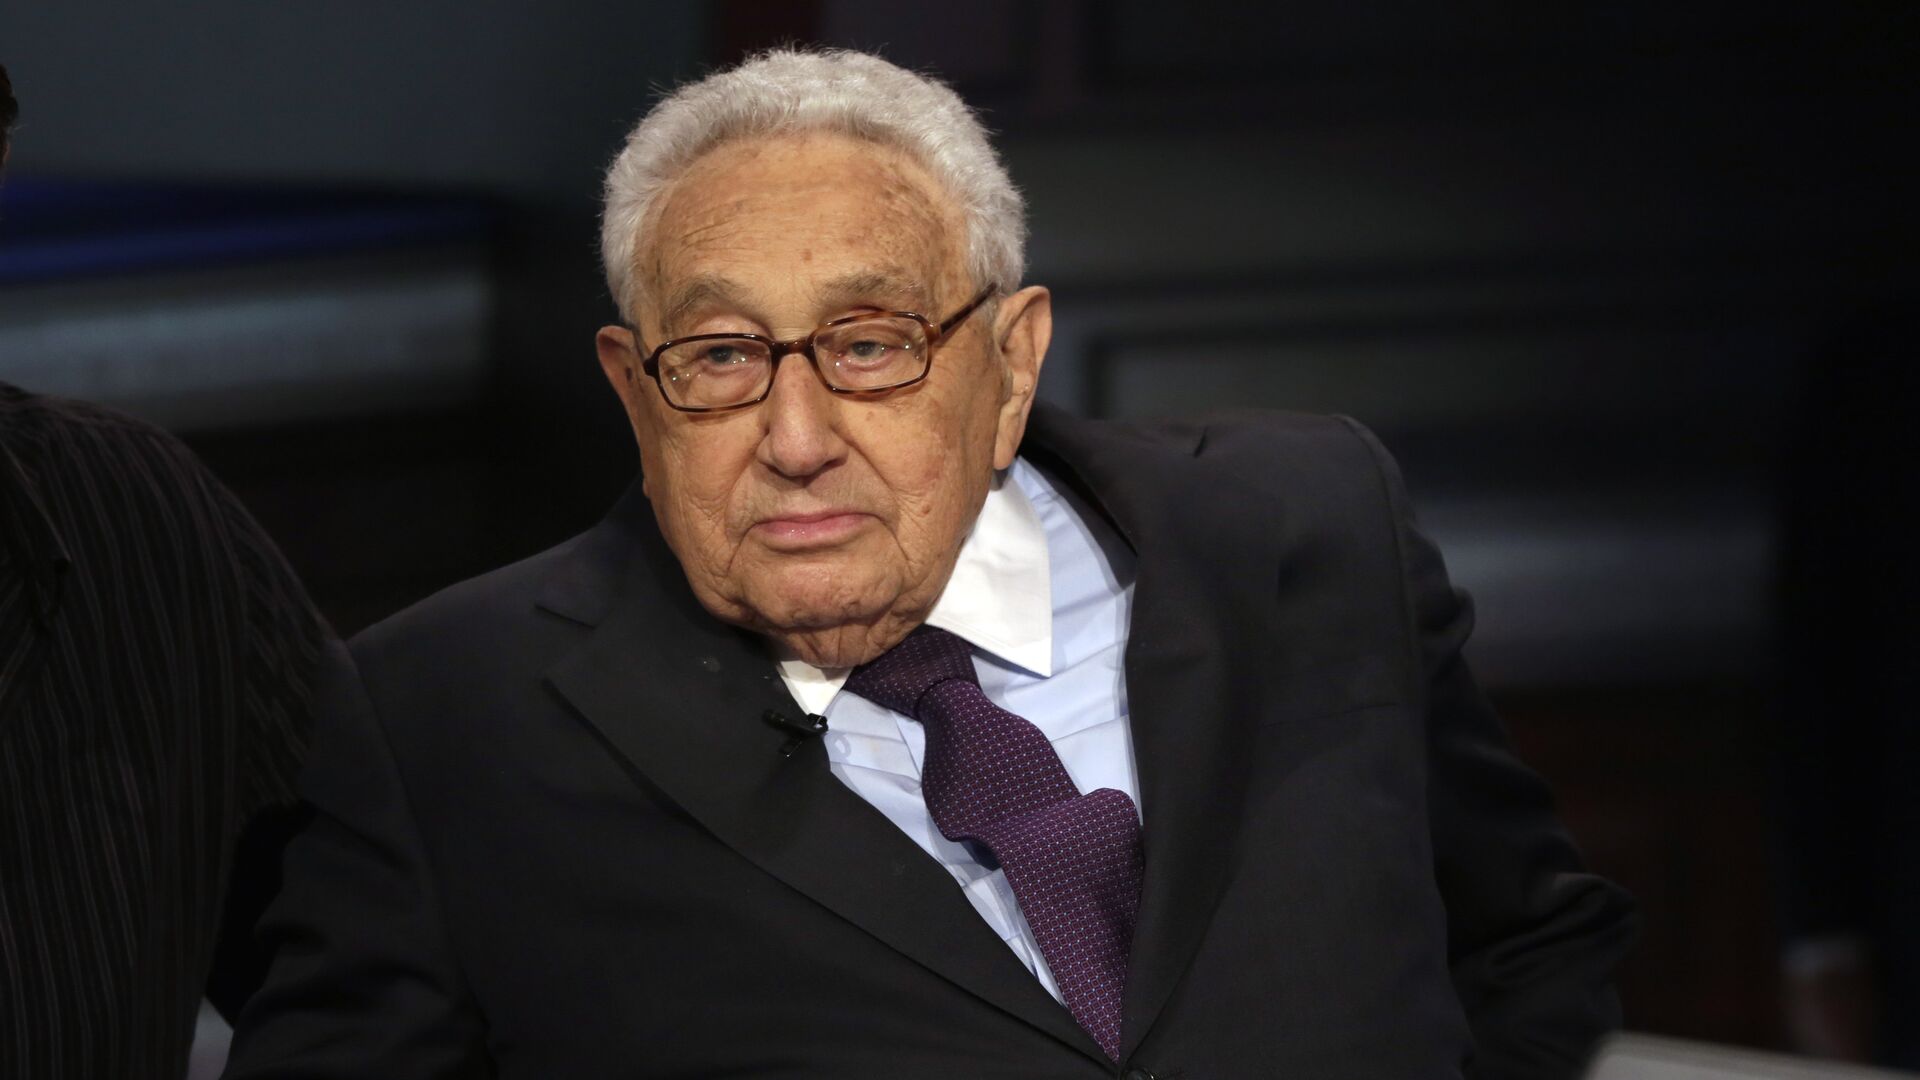 Former U.S. Secretary of State Henry Kissinger is interviewed by Neil Cavuto on his Cavuto Coast to Coast program, on the Fox Business Network, in New York, Friday, June 5, 2015 - Sputnik International, 1920, 23.05.2022